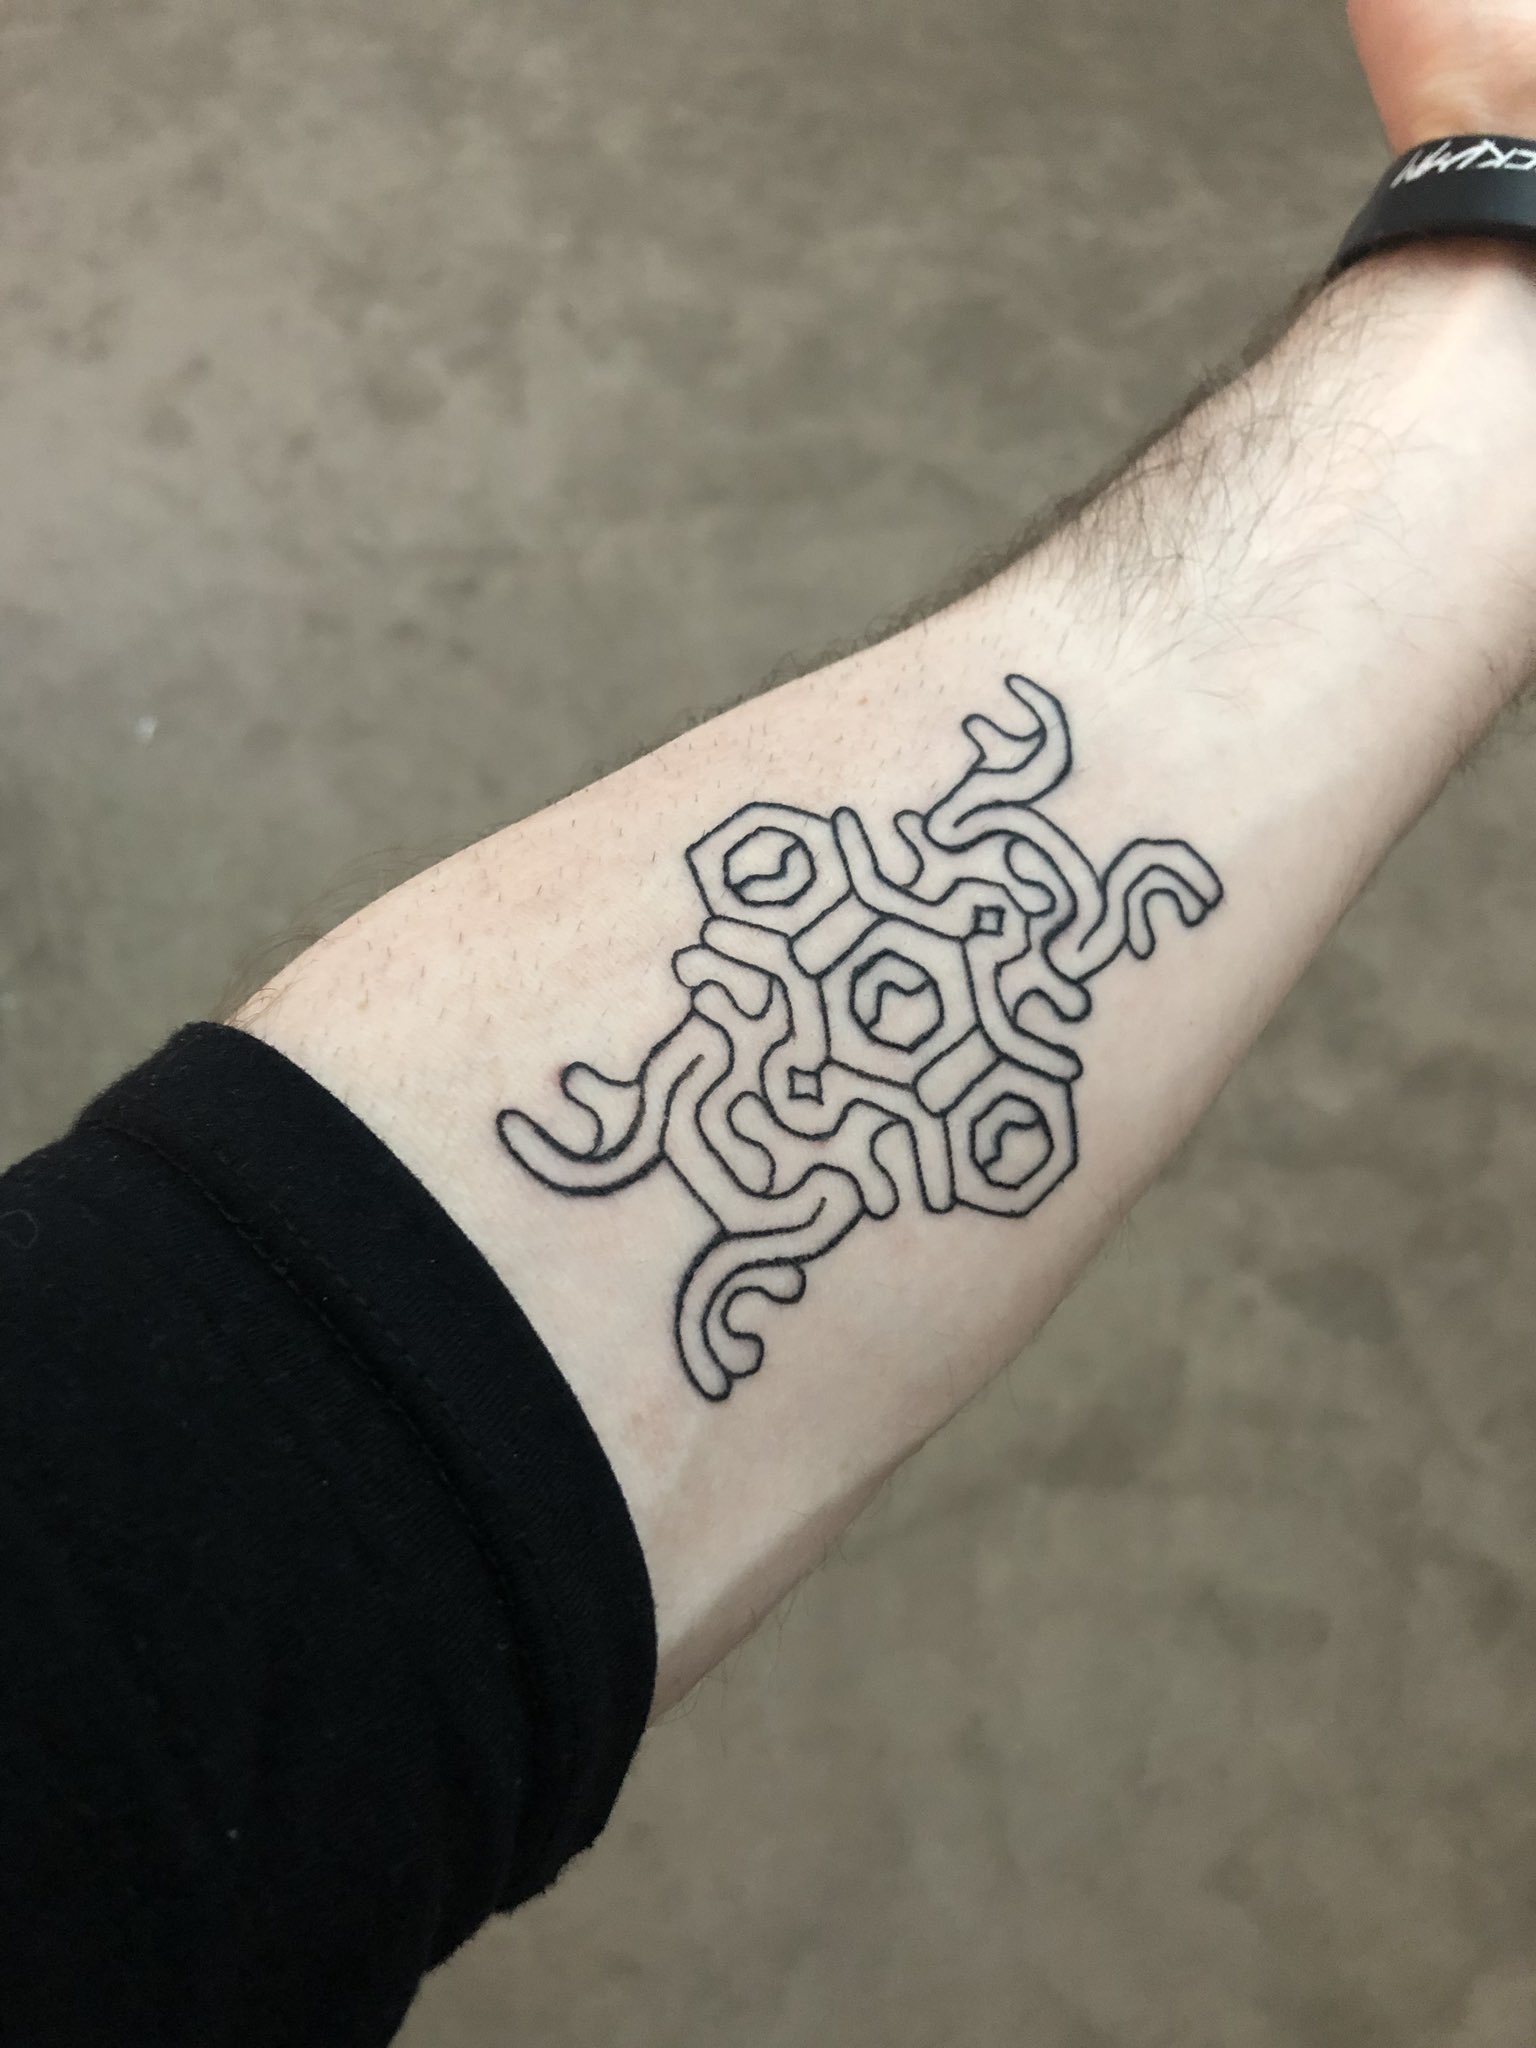 Jacksepticeye on Twitter: "Finally got my Shadow of the Colossus tattoo